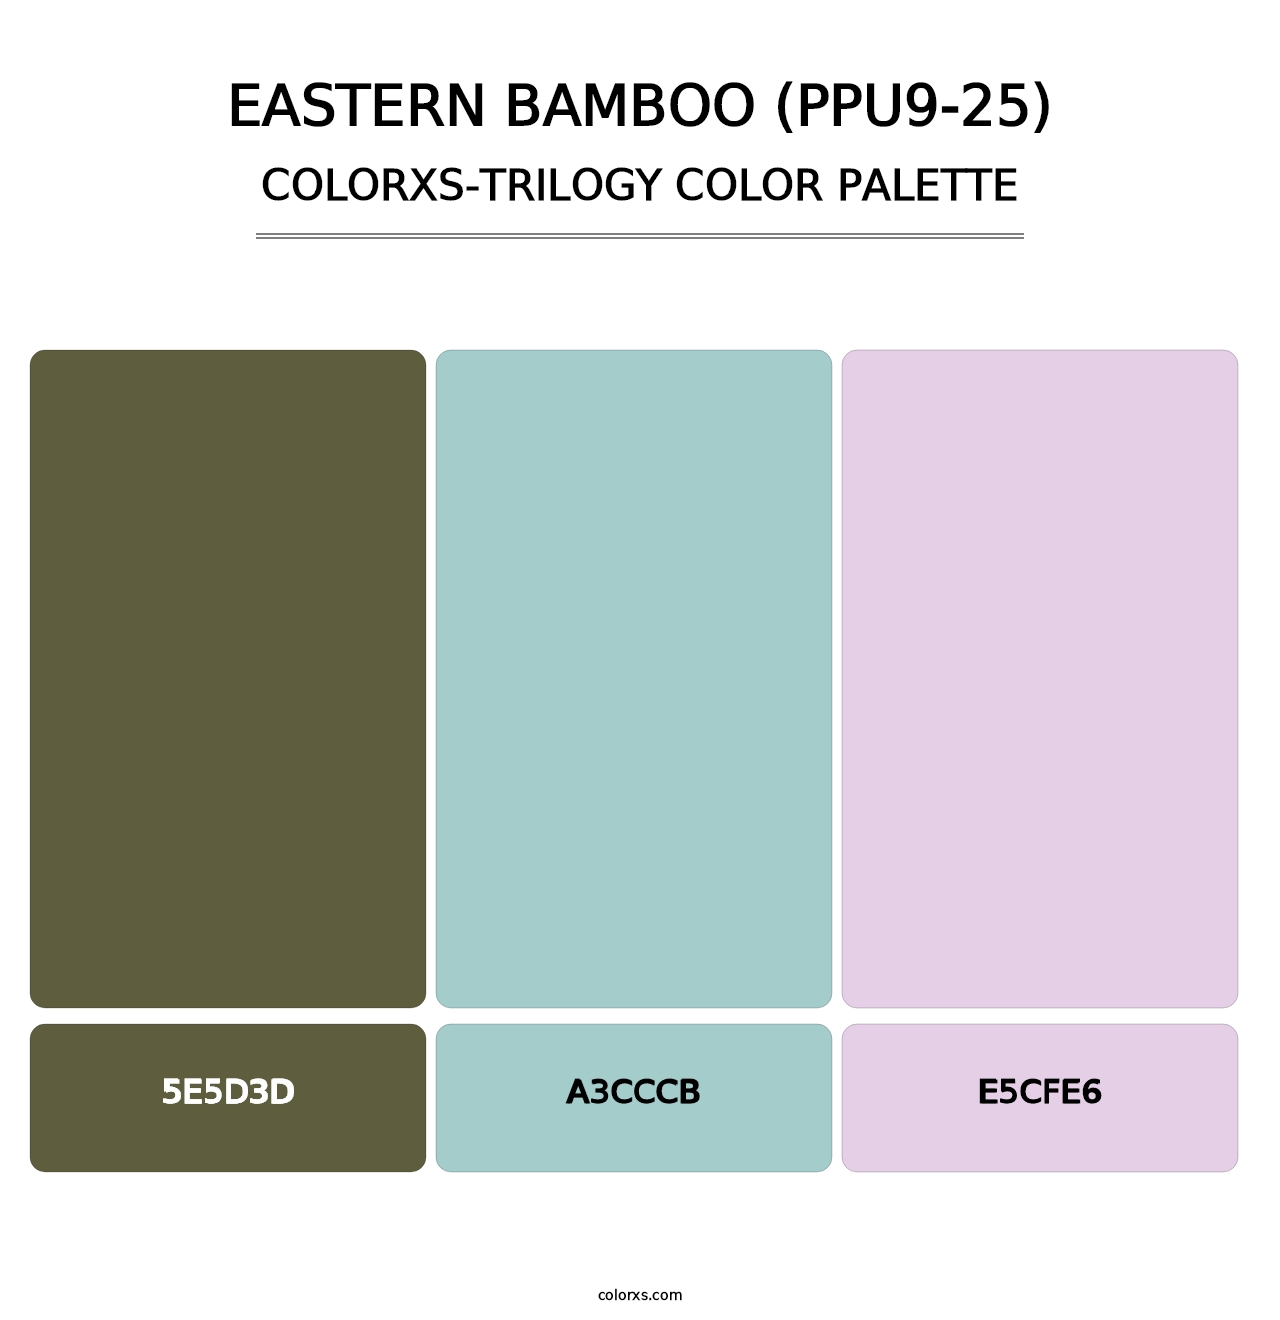 Eastern Bamboo (PPU9-25) - Colorxs Trilogy Palette